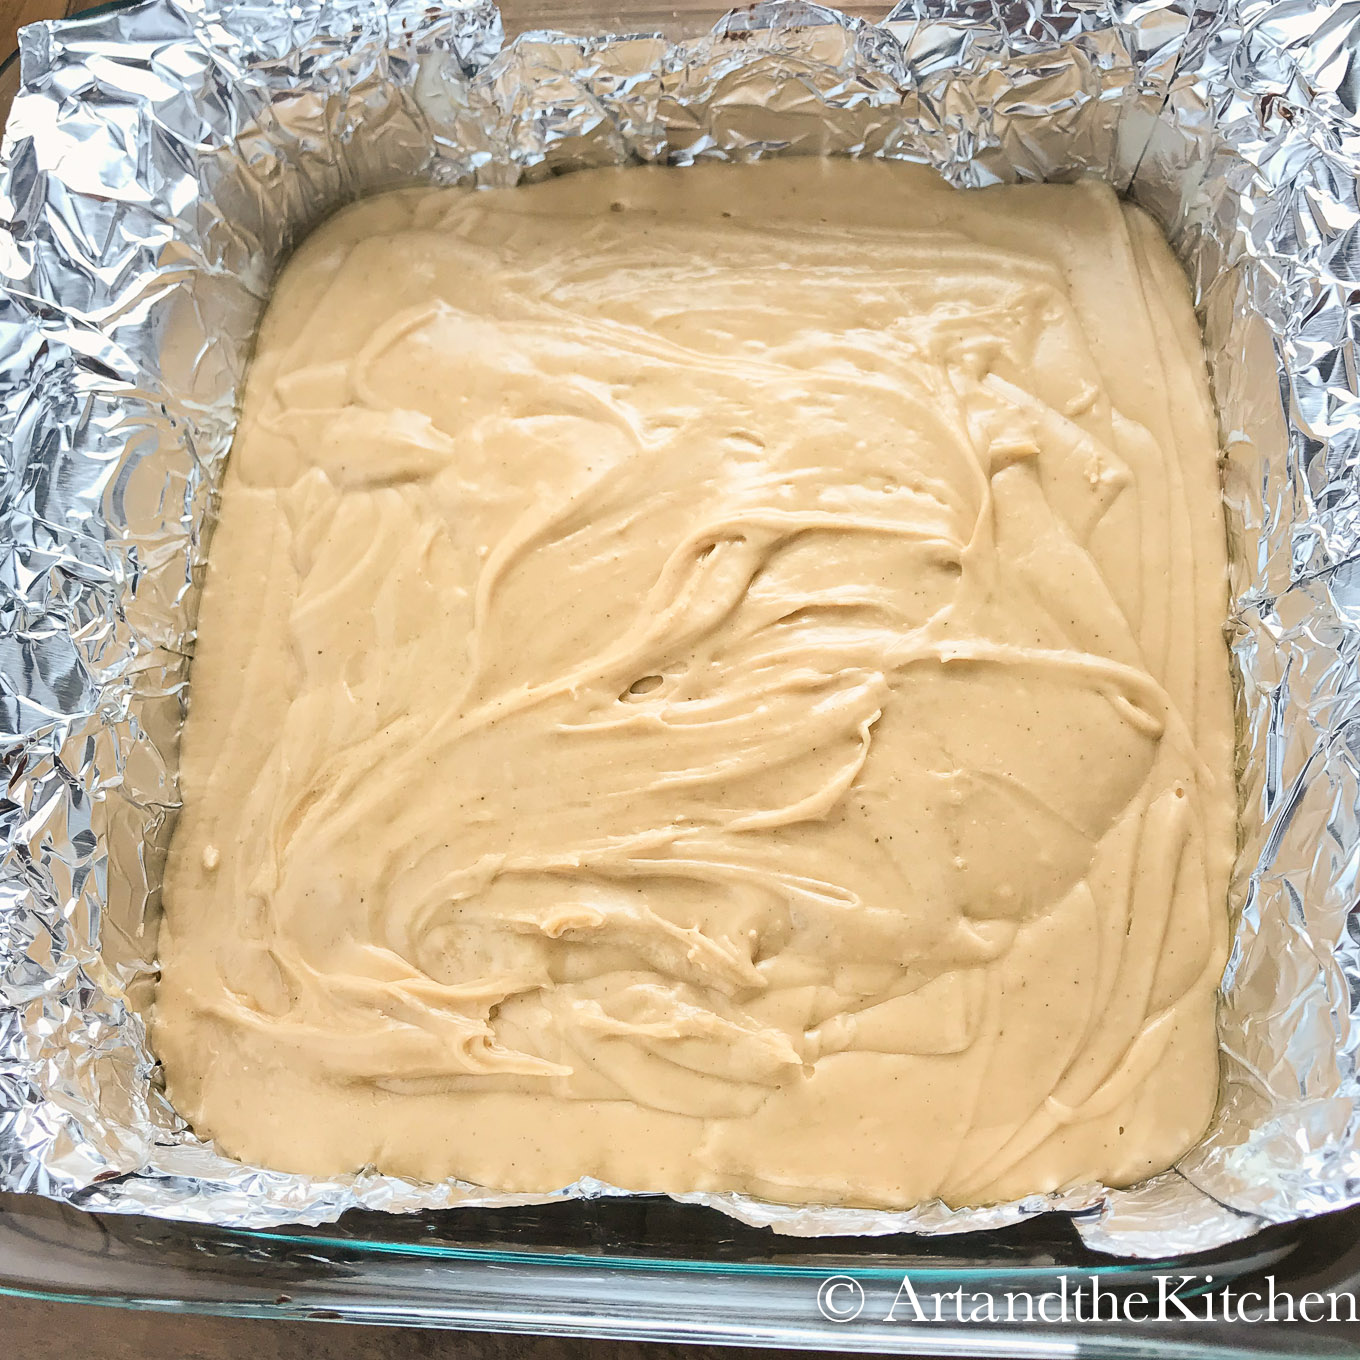 Peanut butter fudge in foil lined glass baking dish.